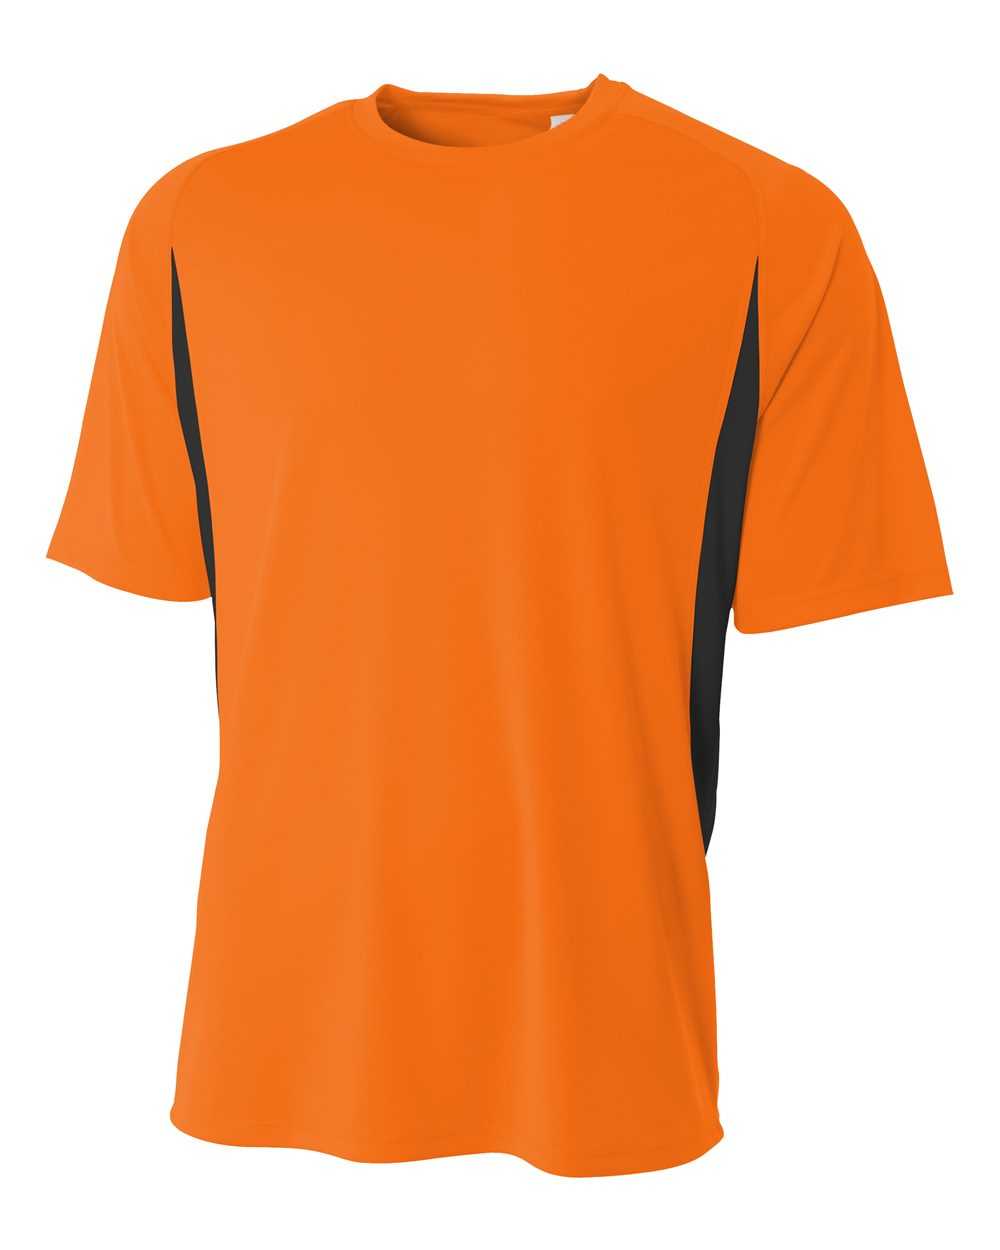 A4 N3181 Cooling Performance Color Blocked Short Sleeve Crew - Safety